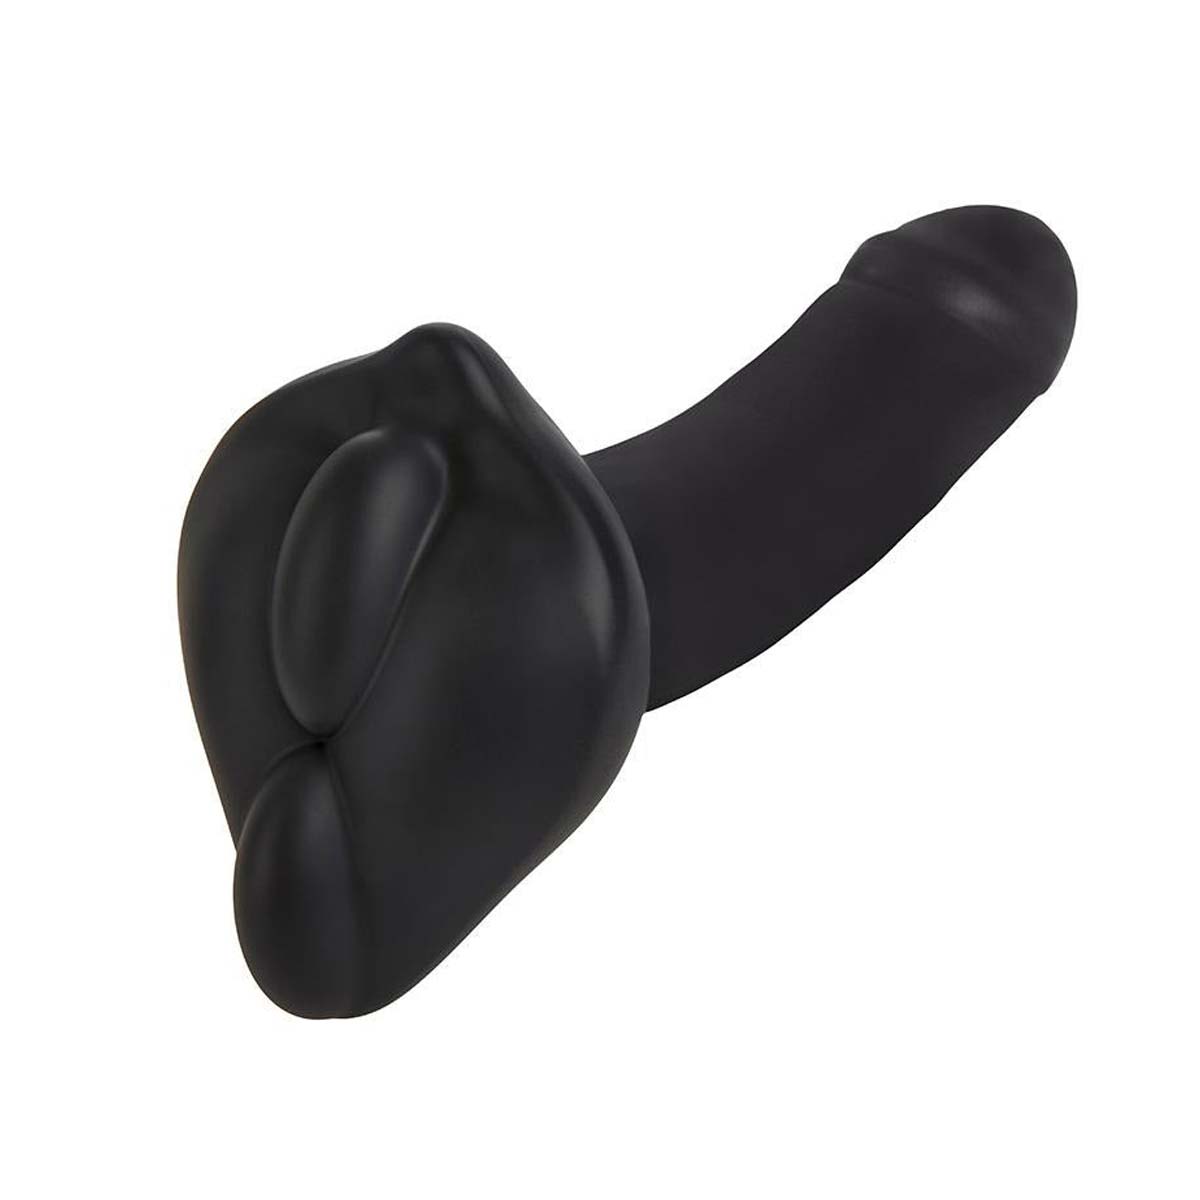 Black silicone stimulation cushion fitted over the end of a black dildo Nudie Co